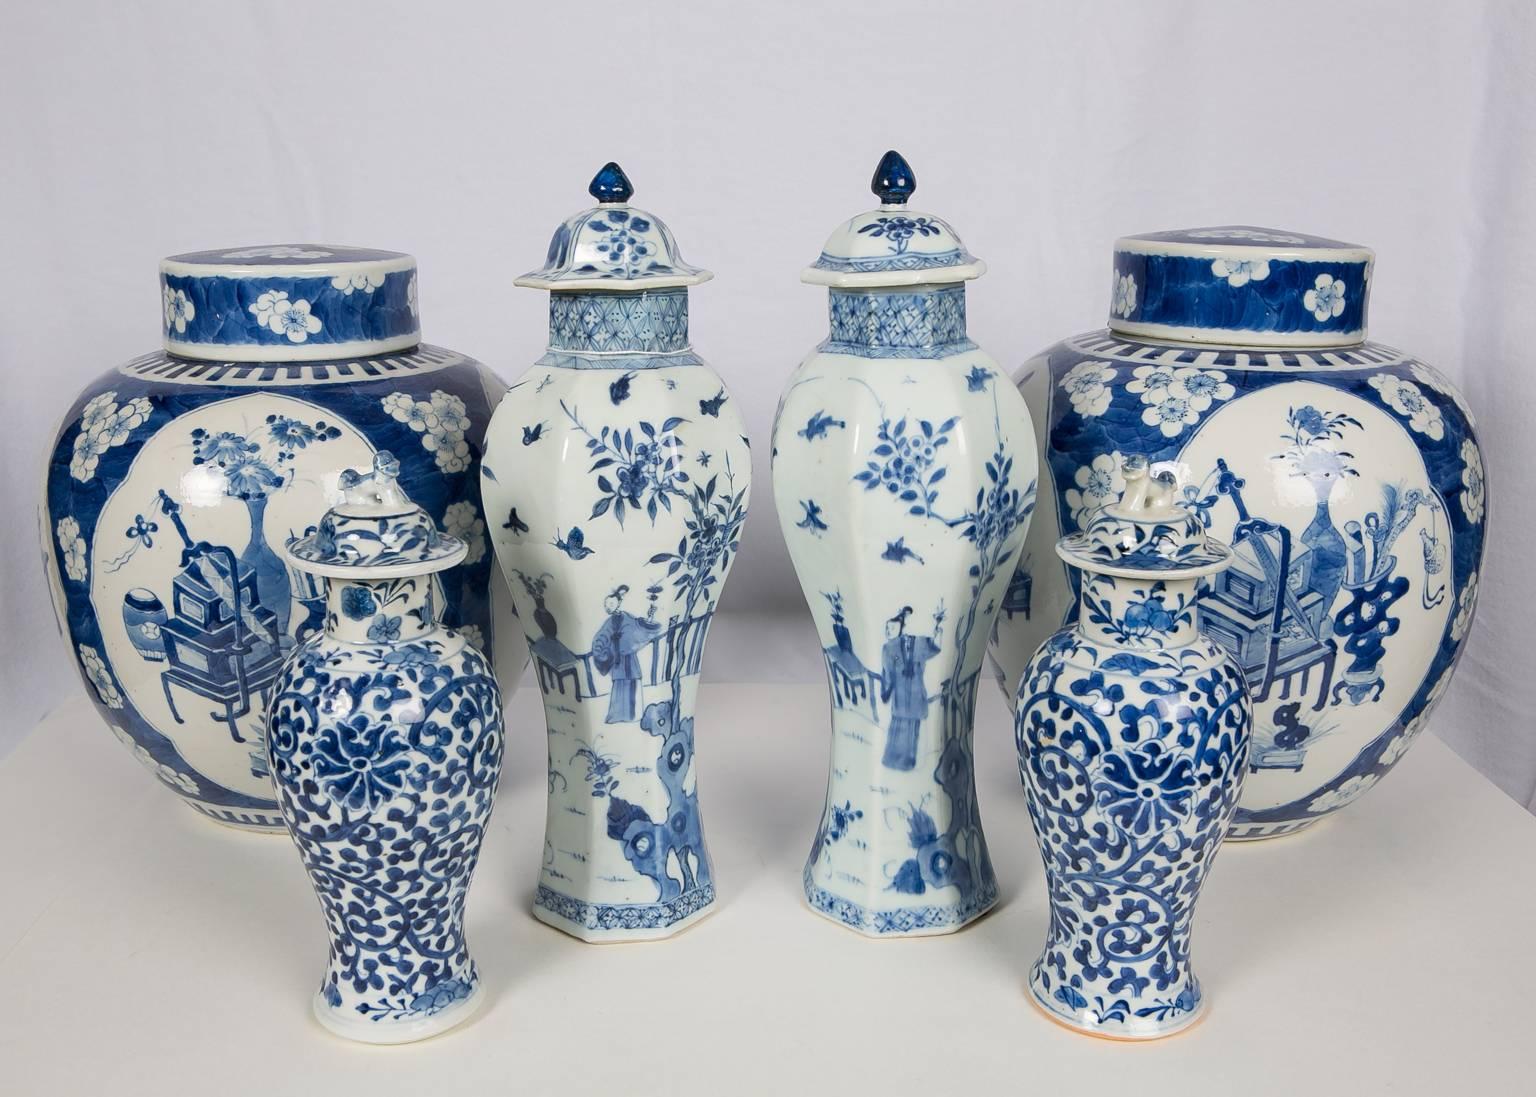 Hand-Painted Blue and White Chinese Porcelain a Collection